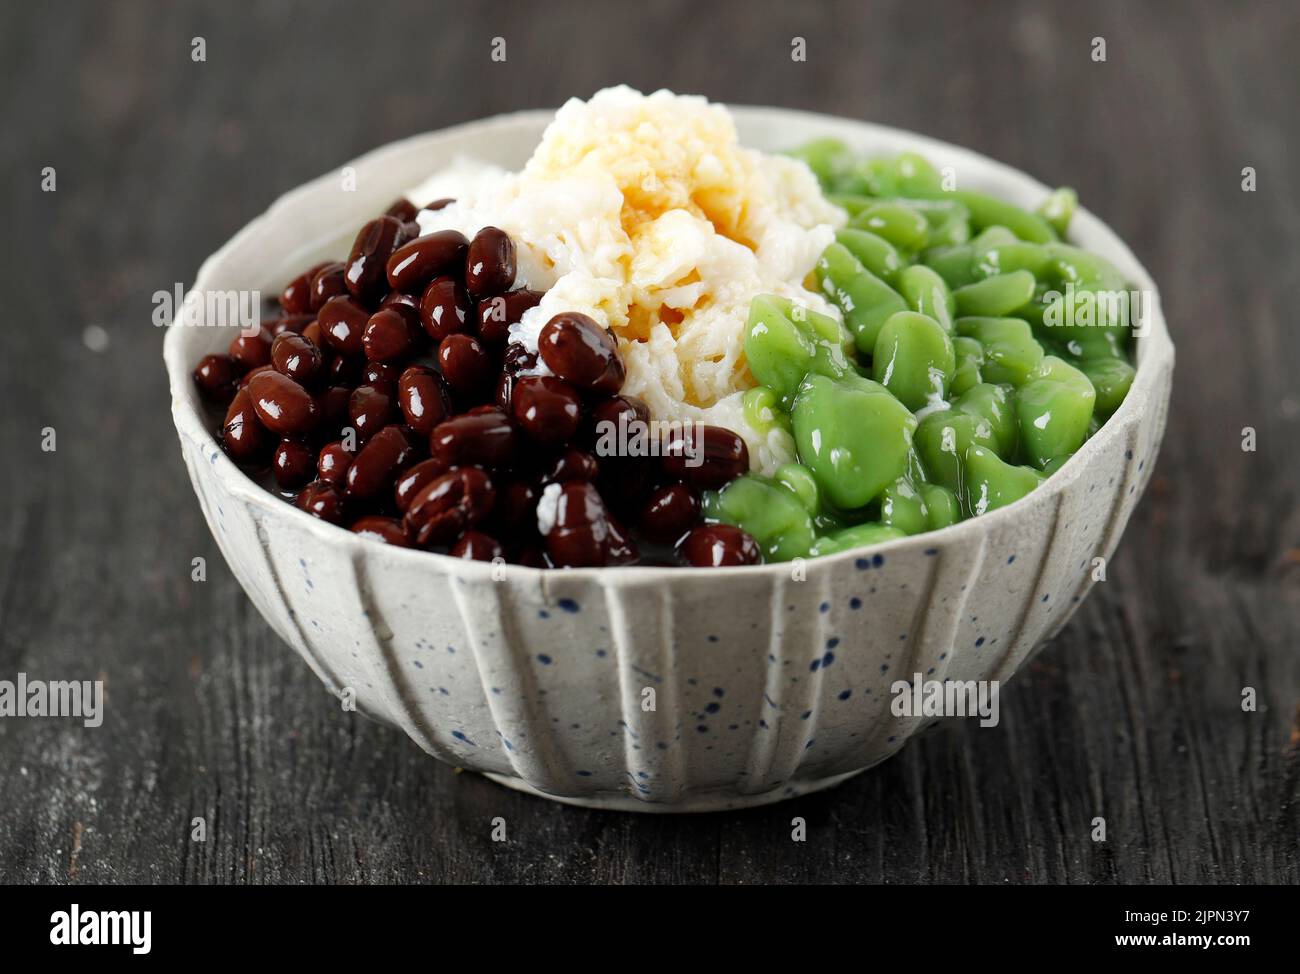 Cendol Malaysian Dessert with Shaved Ice and Red Bean, on Black Wooden Table Stock Photo